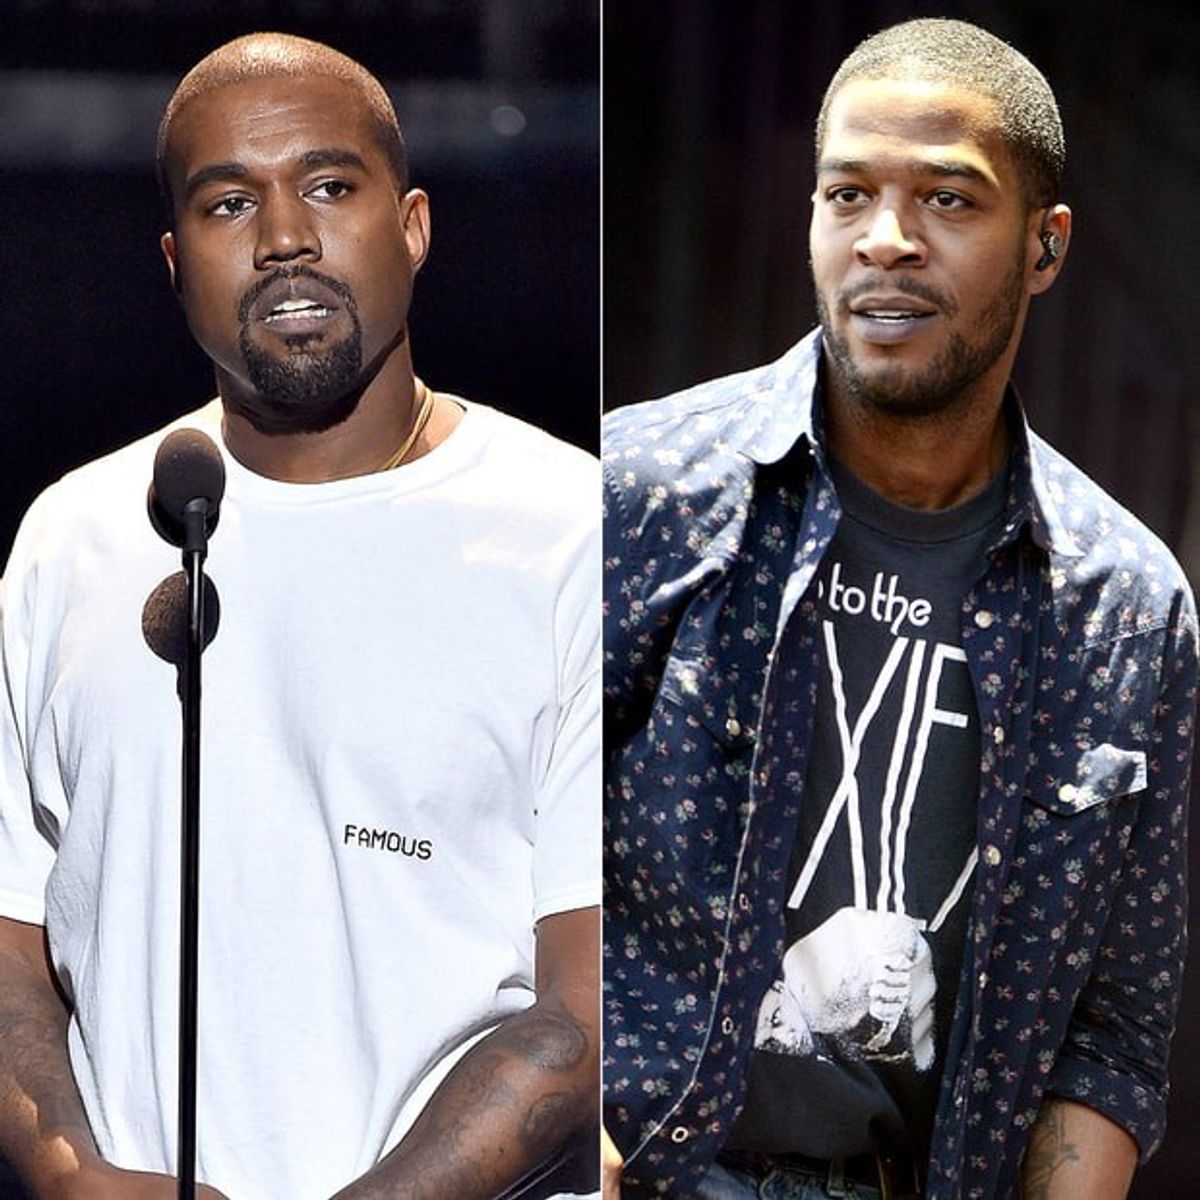 What's The Beef Between Kanye And Kid Cudi?